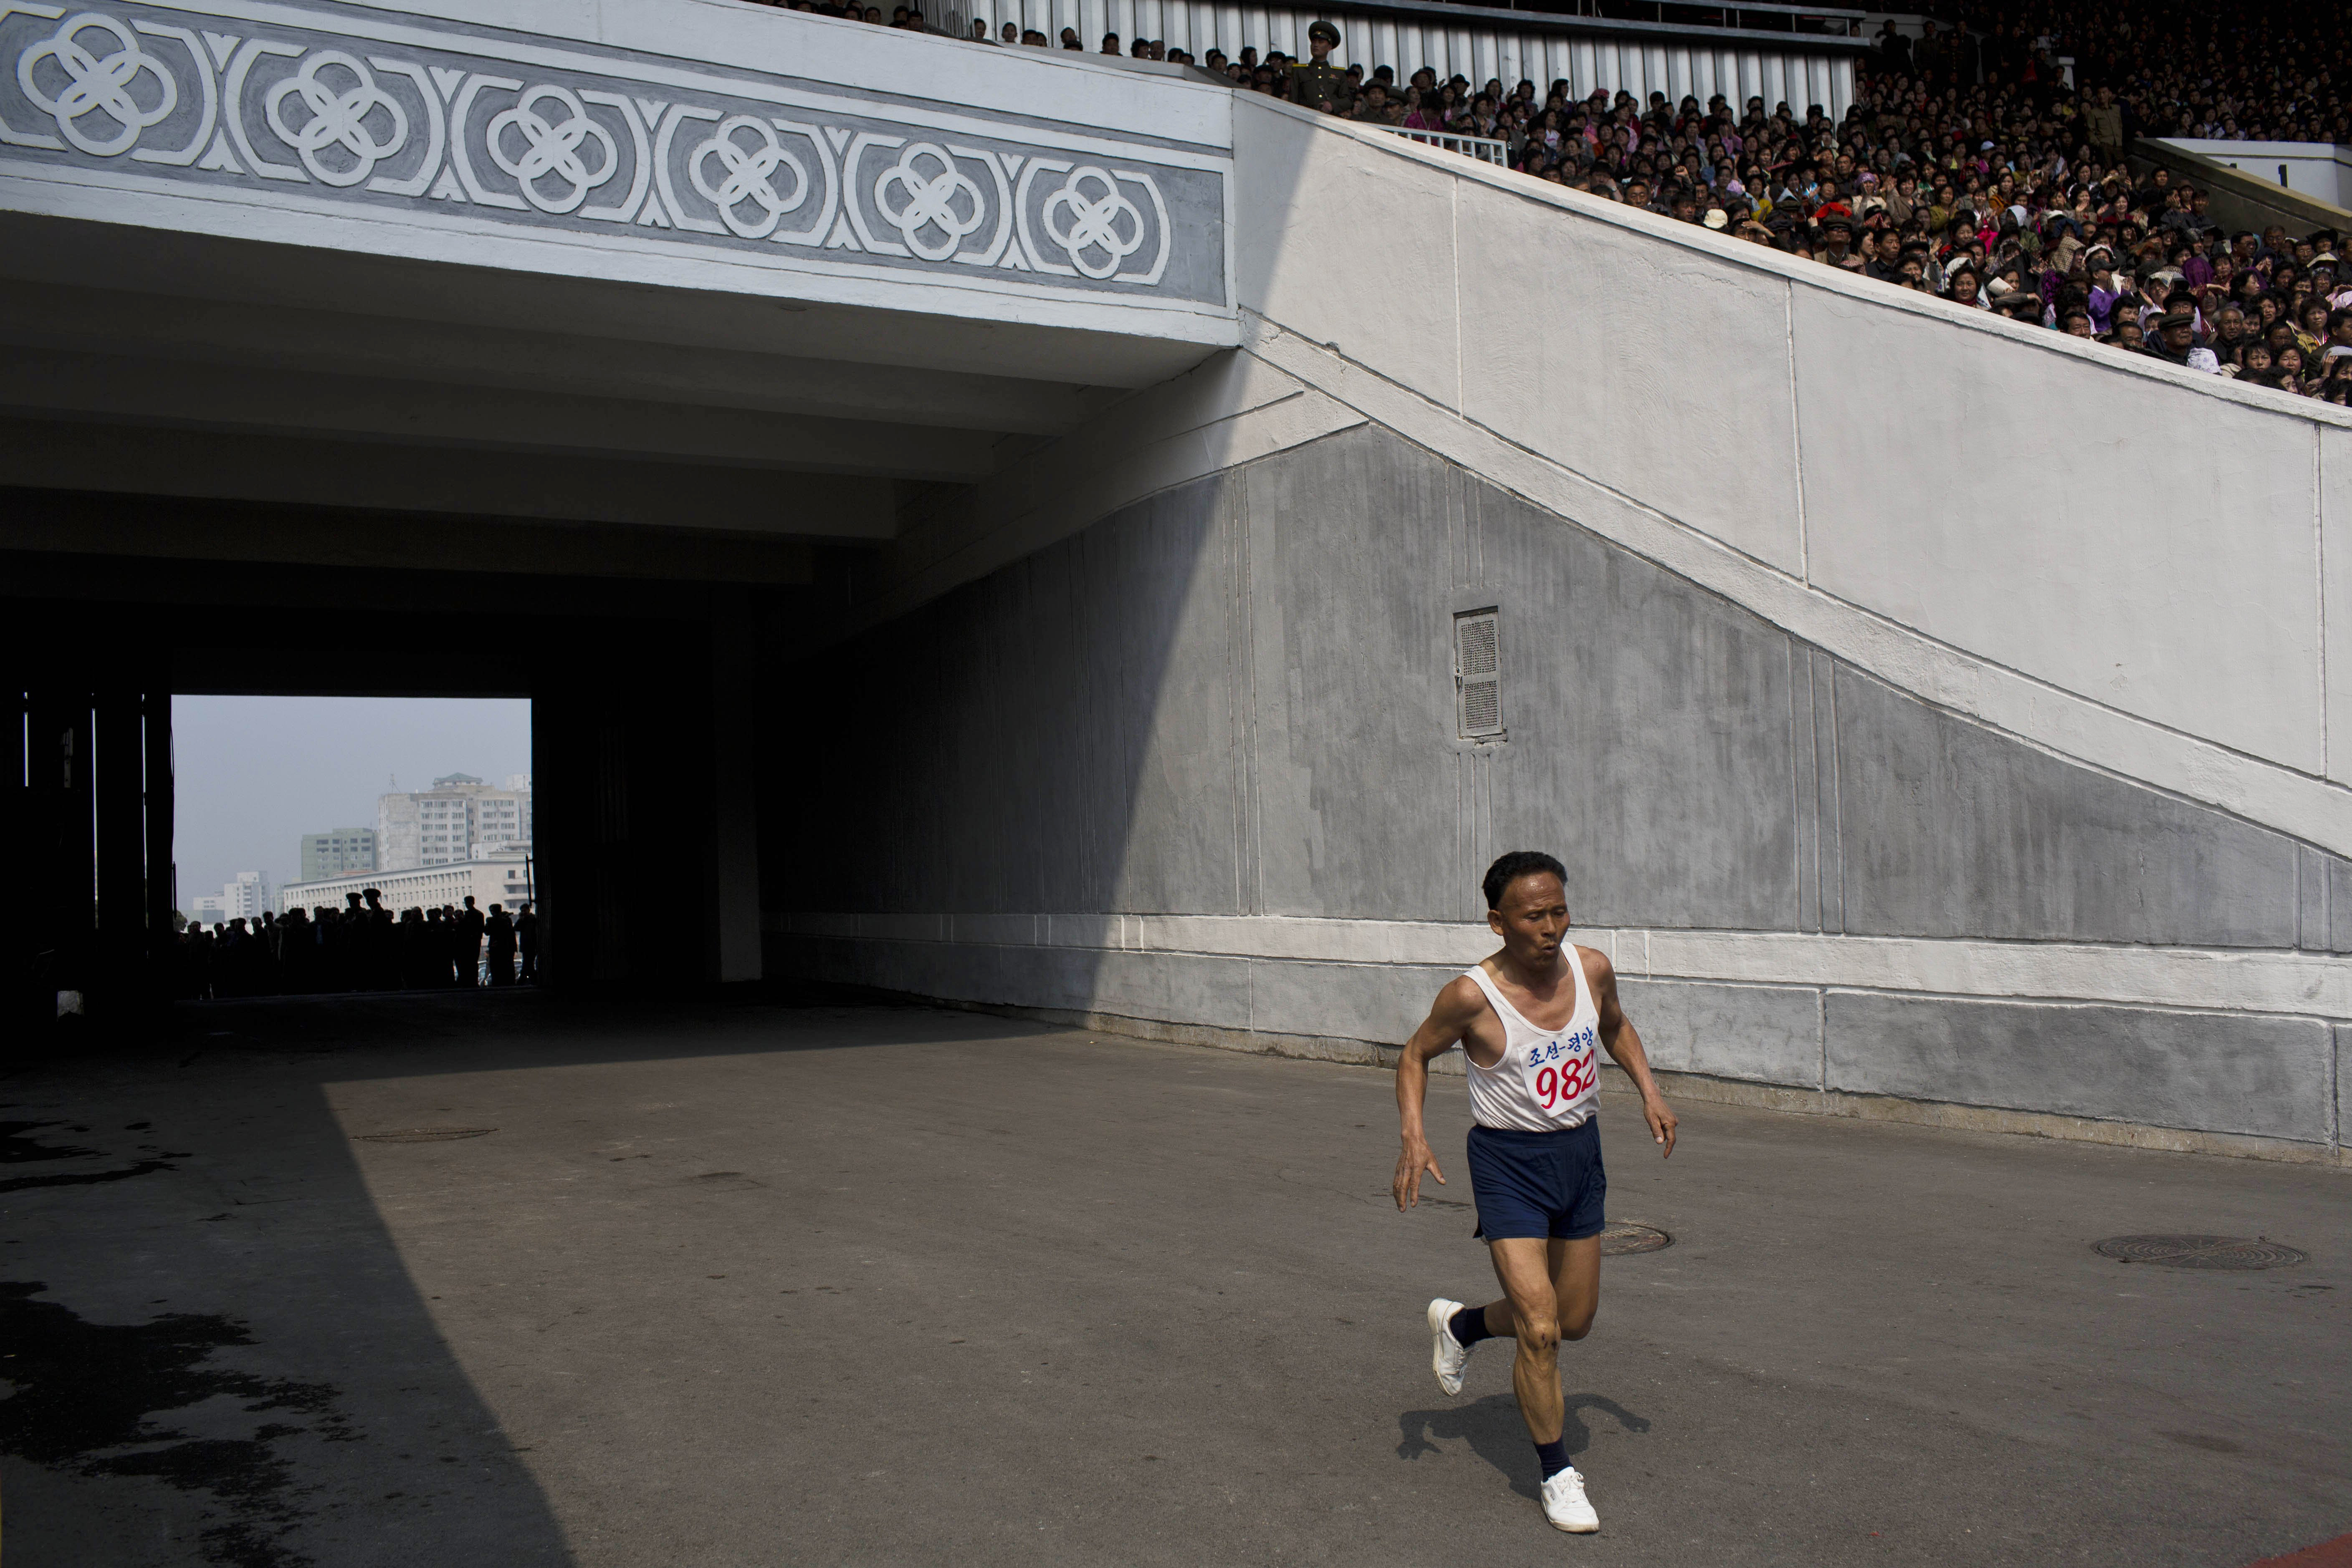 Apr. 13, 2014. An elderly North Korean man enters Kim Il Sung Stadium at the last stretch of his run during the Mangyongdae Prize International Marathon in Pyongyang, North Korea. The annual race, which includes a full marathon, a half marathon, and a 10-kilometer run, was open to foreign tourists for the first time this year.